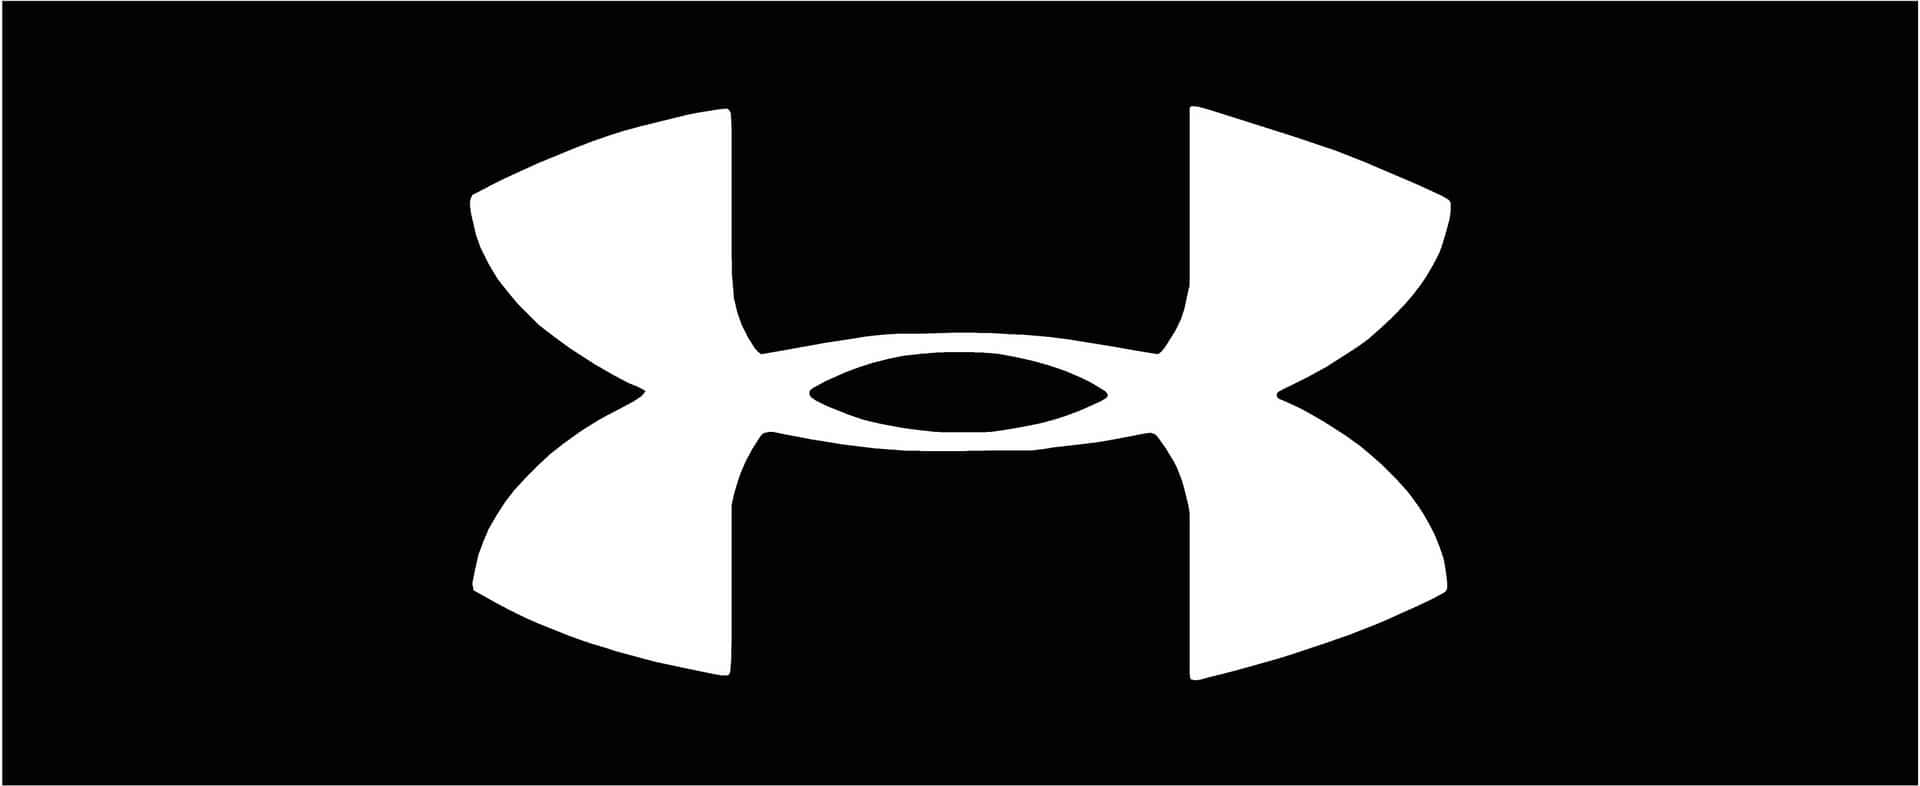 Look and feel your best with Under Armour